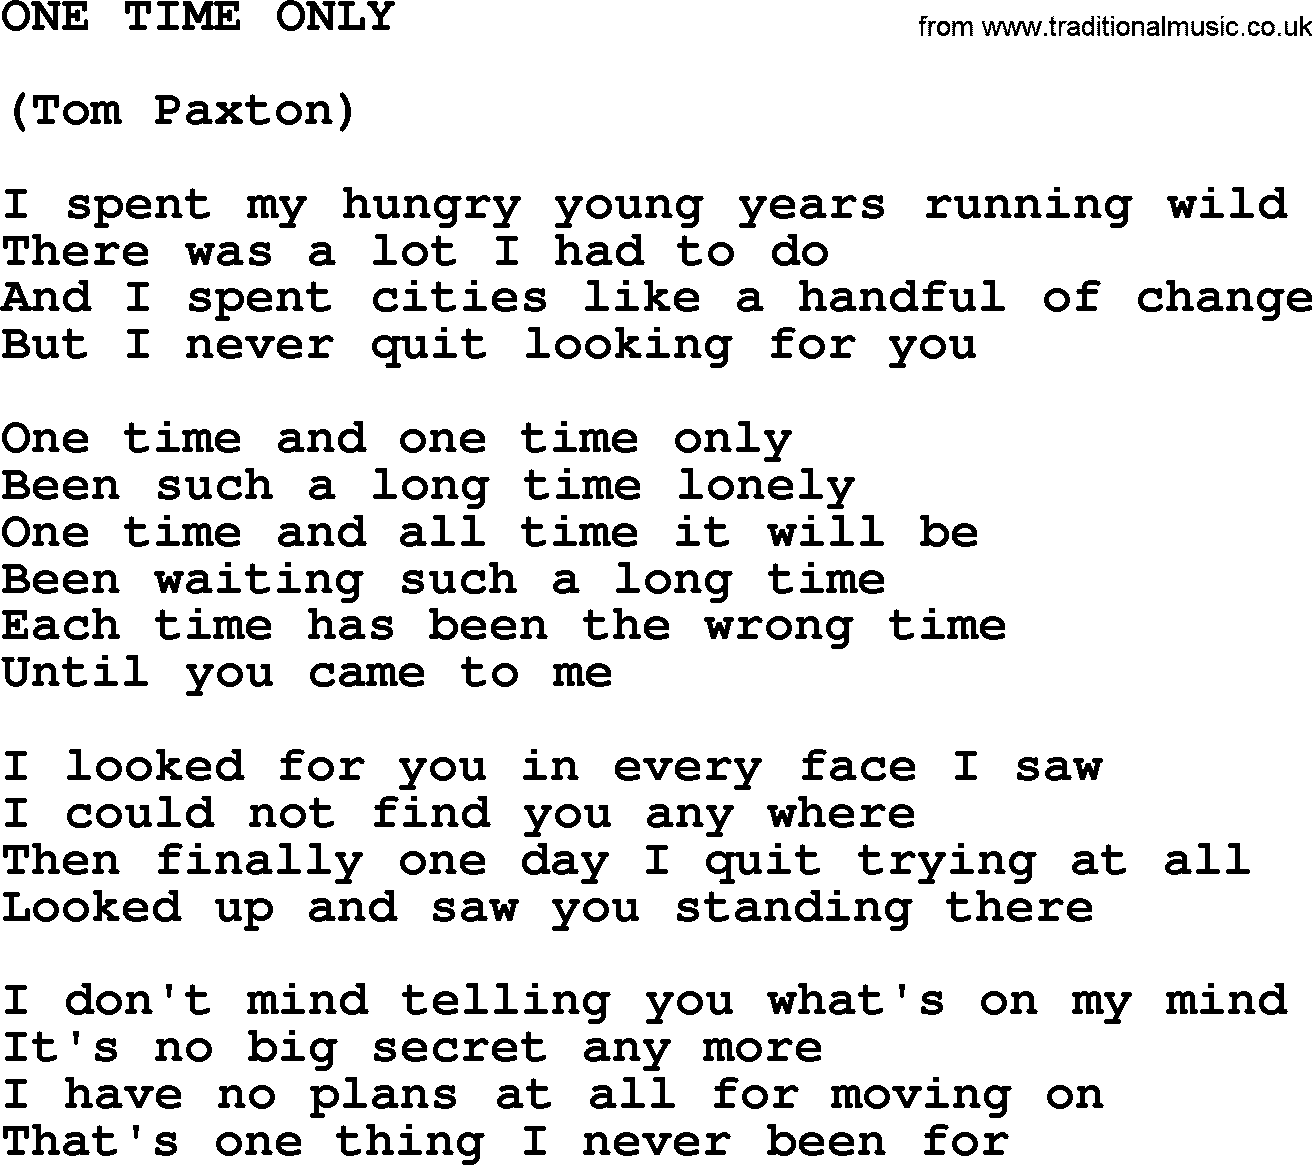 Tom Paxton song: One Time Only, lyrics